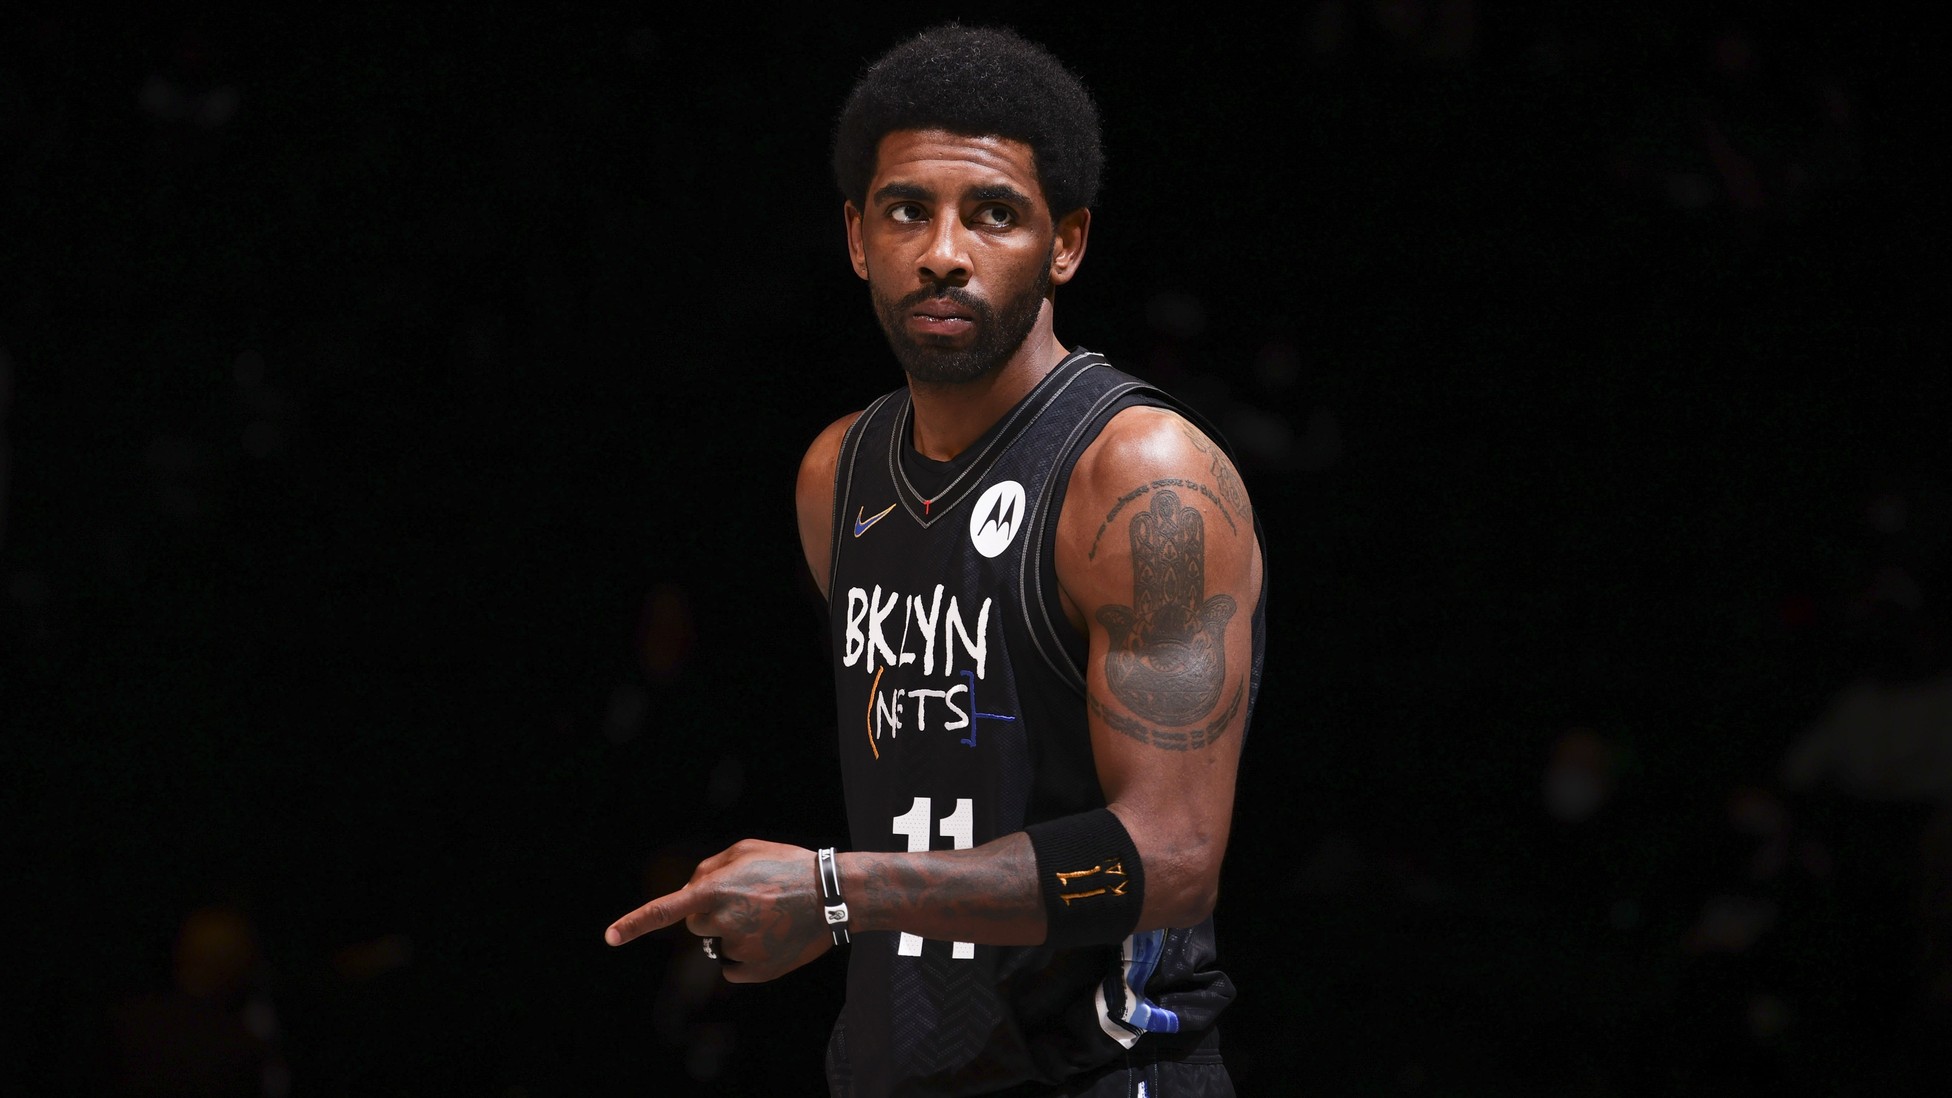 The Brooklyn Nets player Kyrie Irving 